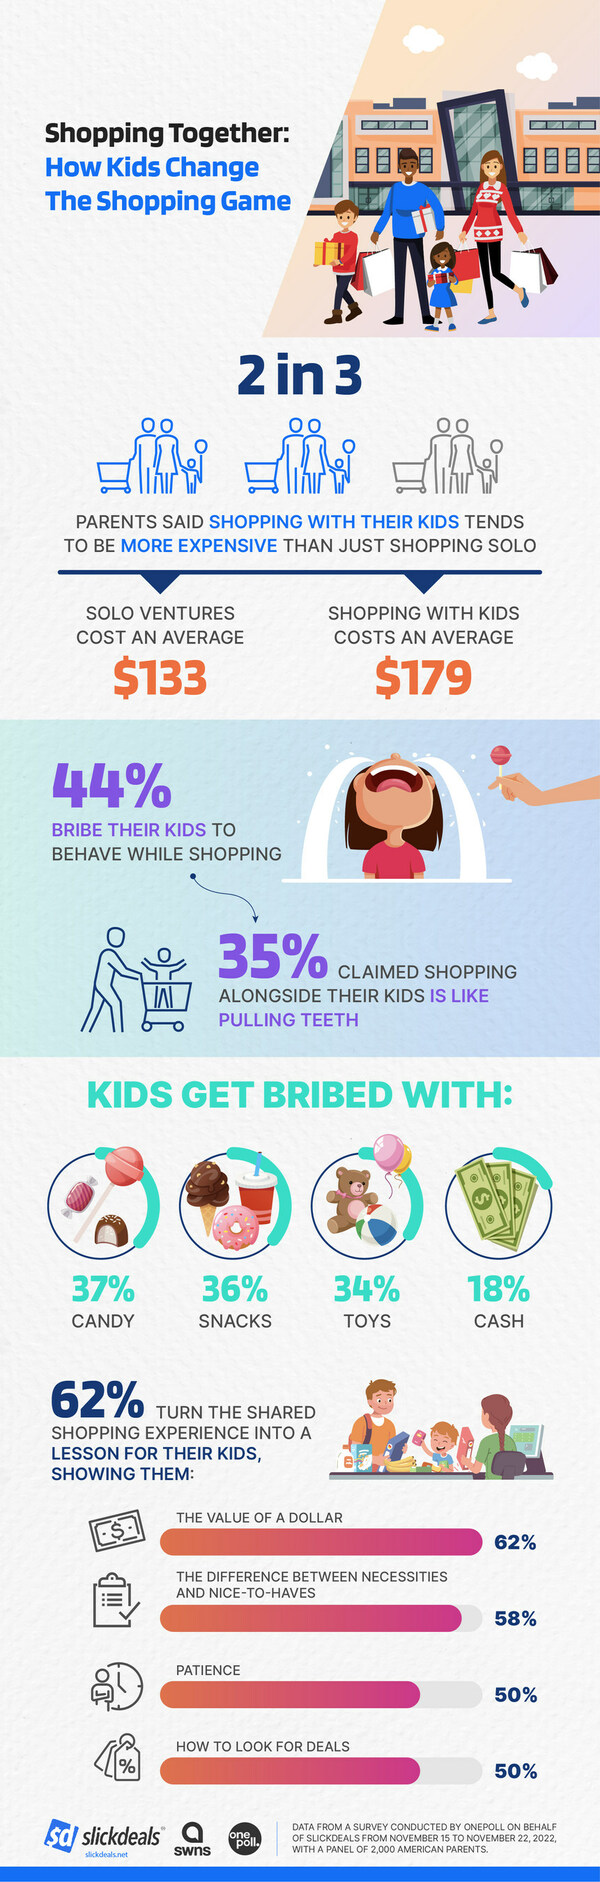 American parents who shop with their kids spend 35% more than shopping alone, according to a study commissioned by Slickdeals